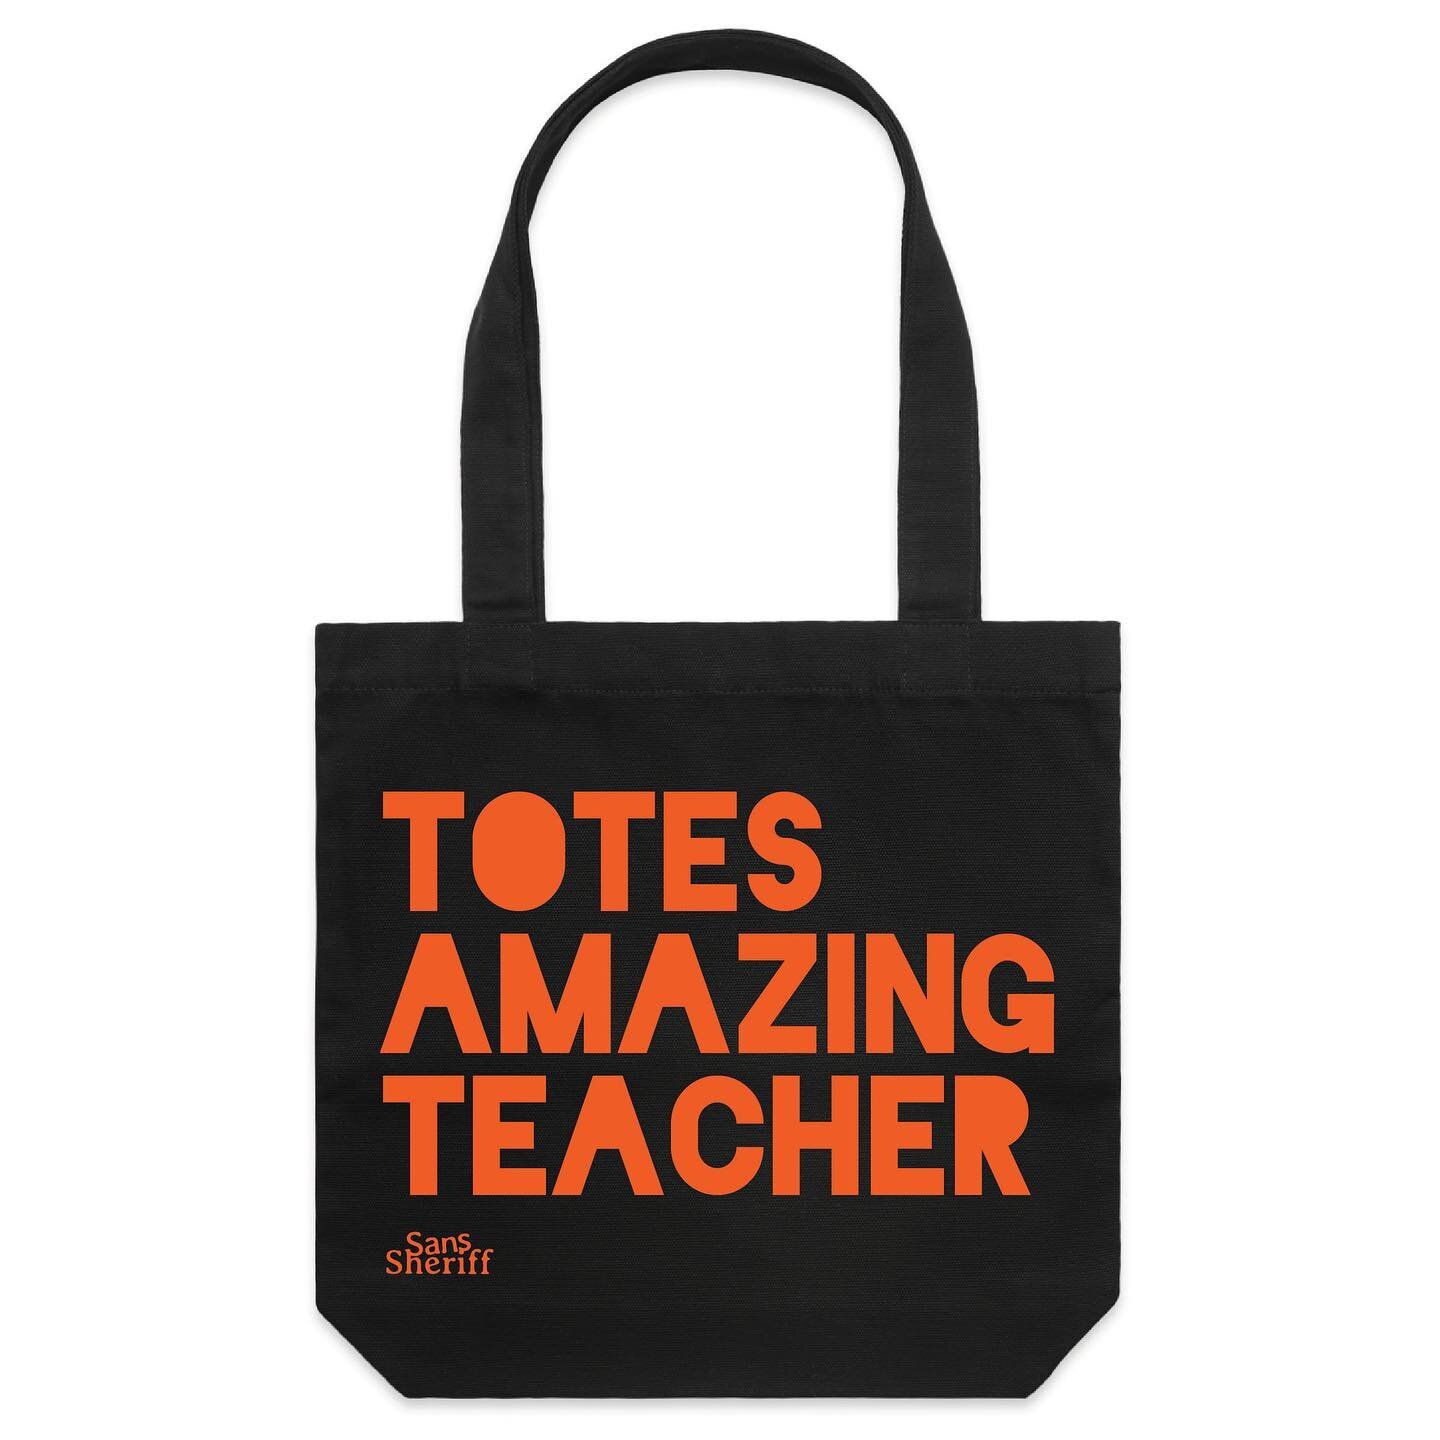 Teacher totes available now. Order quick for delivery before the end of term. An awesome end of year gift for a teacher. Either fill it with goodies as a class gift, or just give the bag from your kid. It&rsquo;s the gift teachers love to receive!